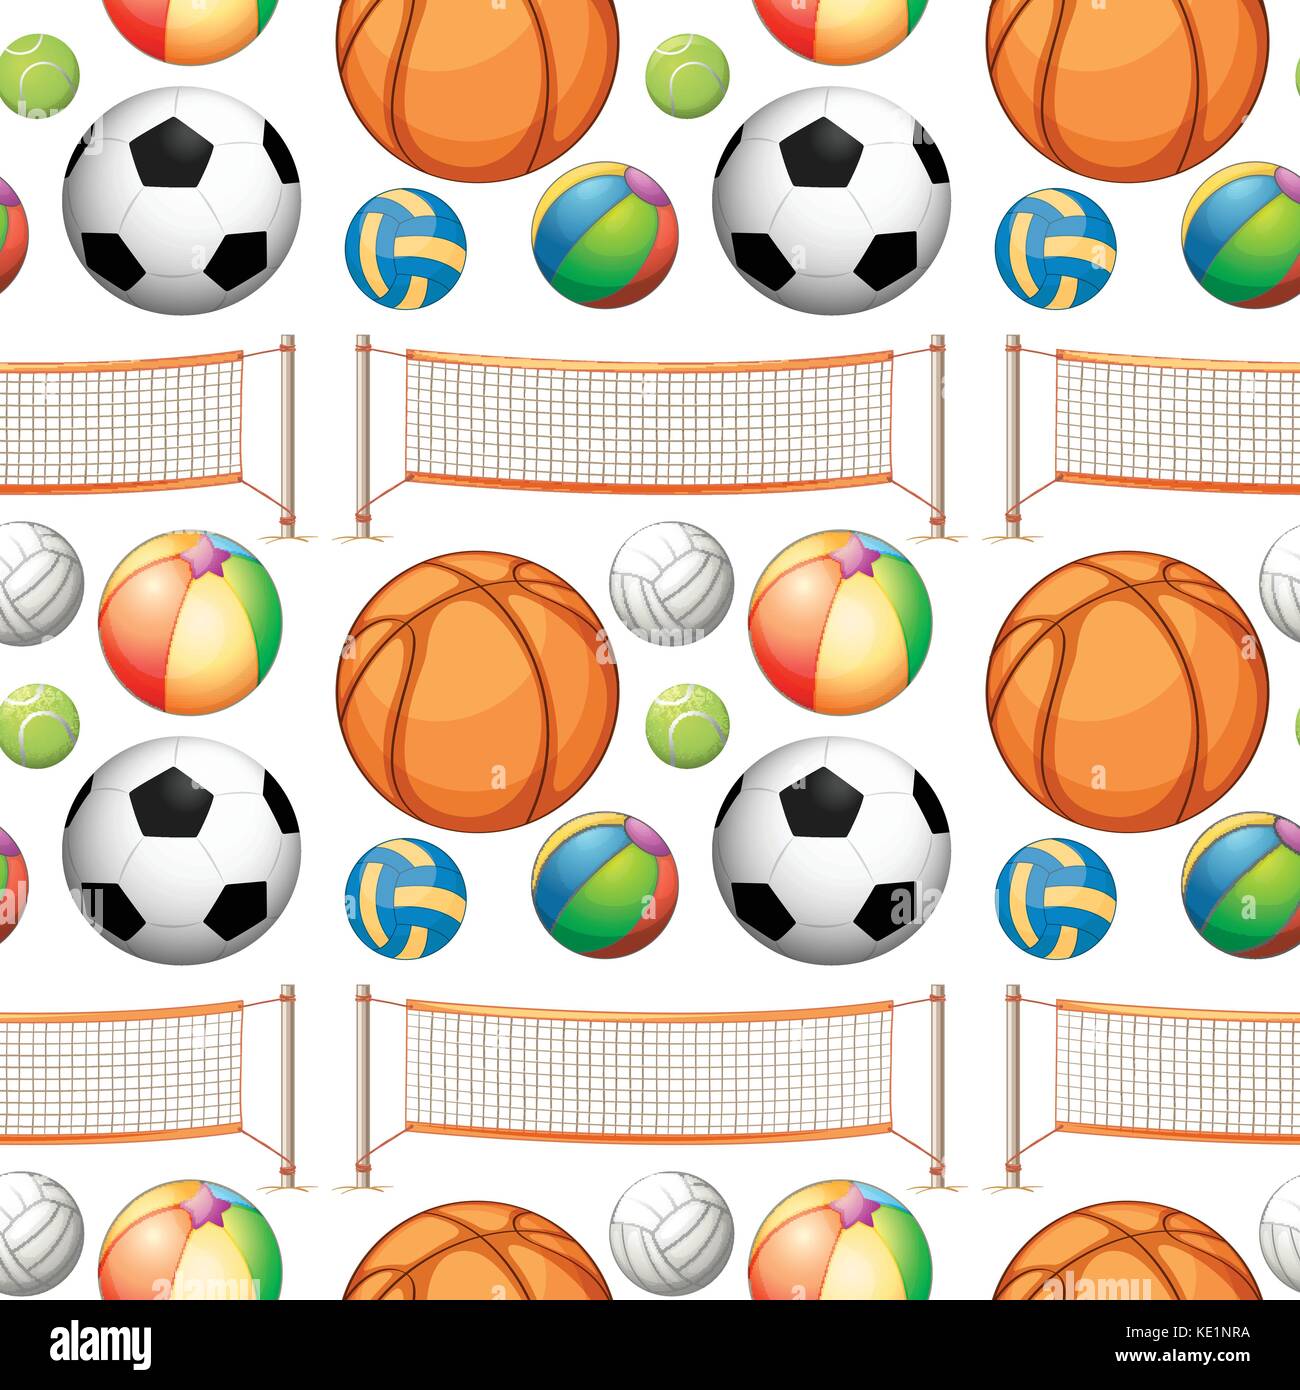 Seamless different kind of balls and net illustration Stock Vector